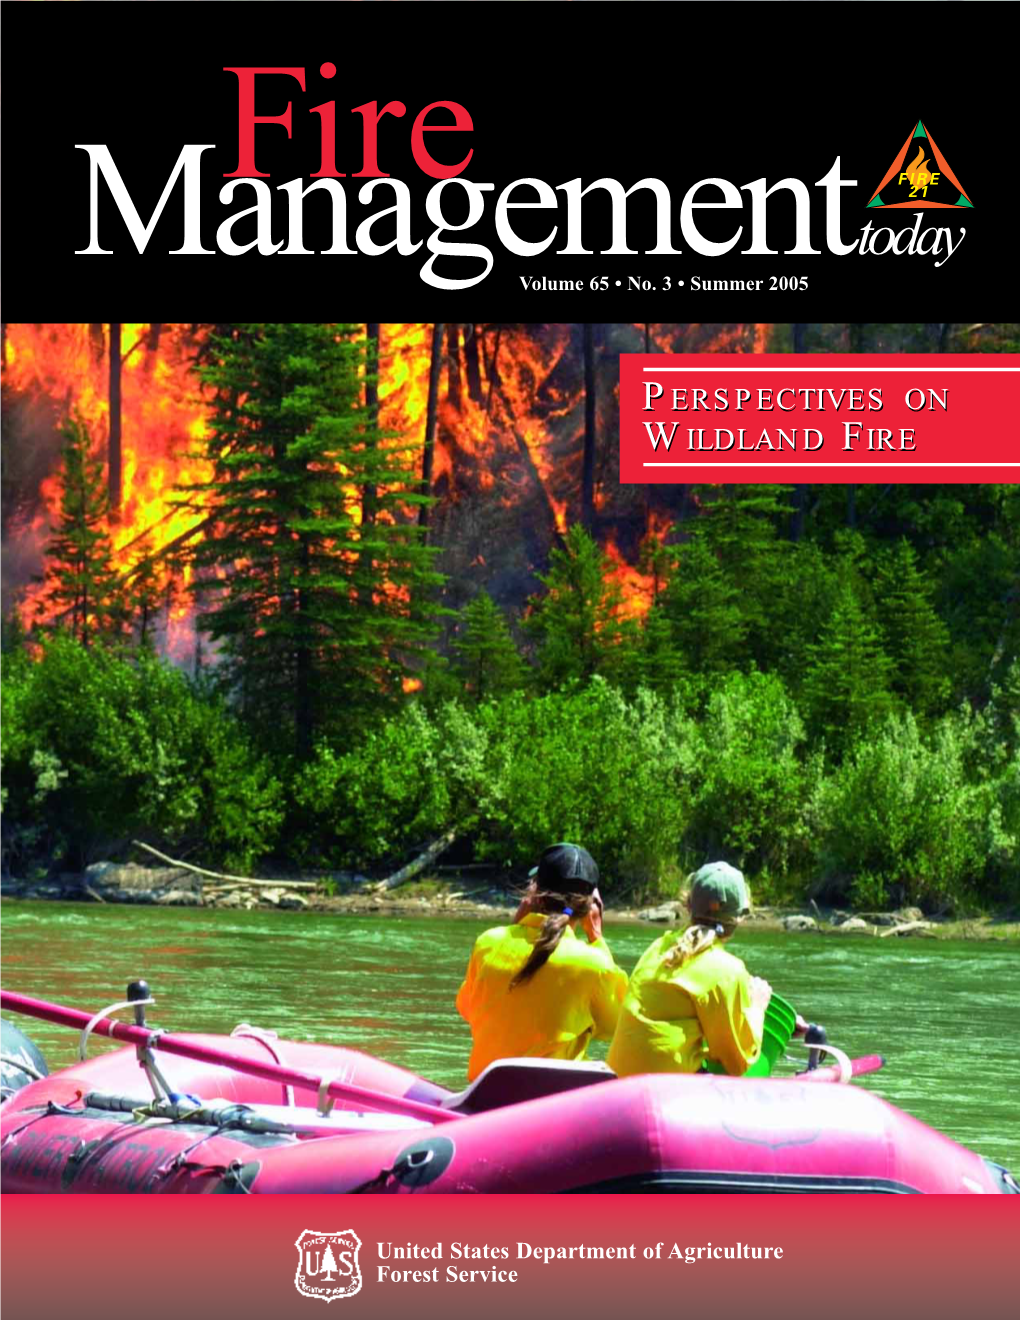 Rapid-Response Fire Behavior Research and Real-Time Monitoring, P. 23